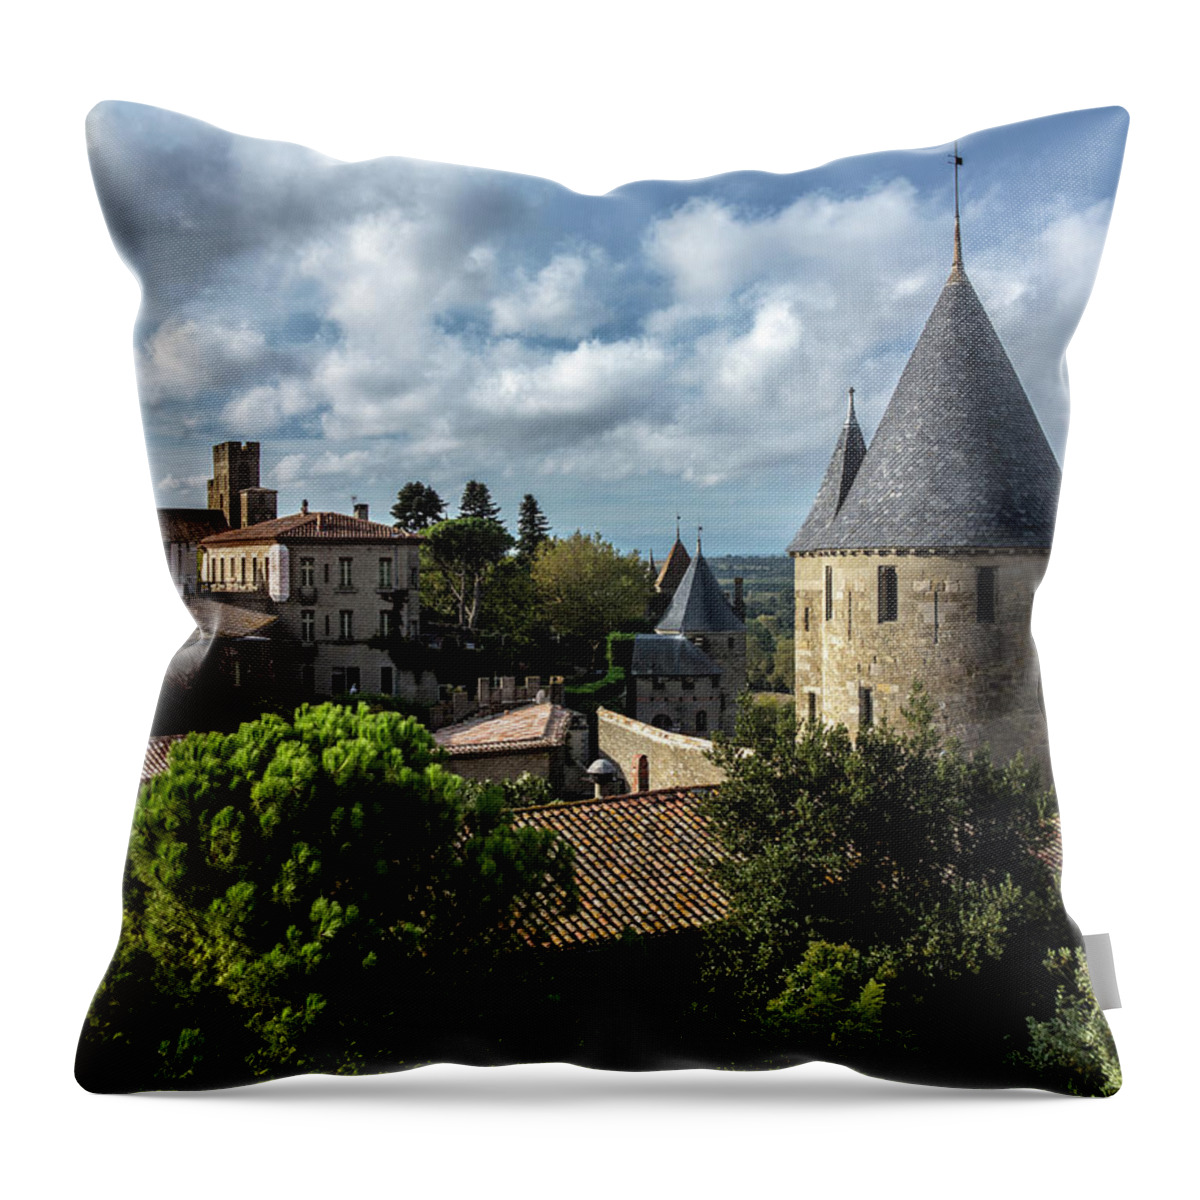 Treetop Throw Pillow featuring the photograph Carcassonne Medieval City Wall And #1 by Izzet Keribar